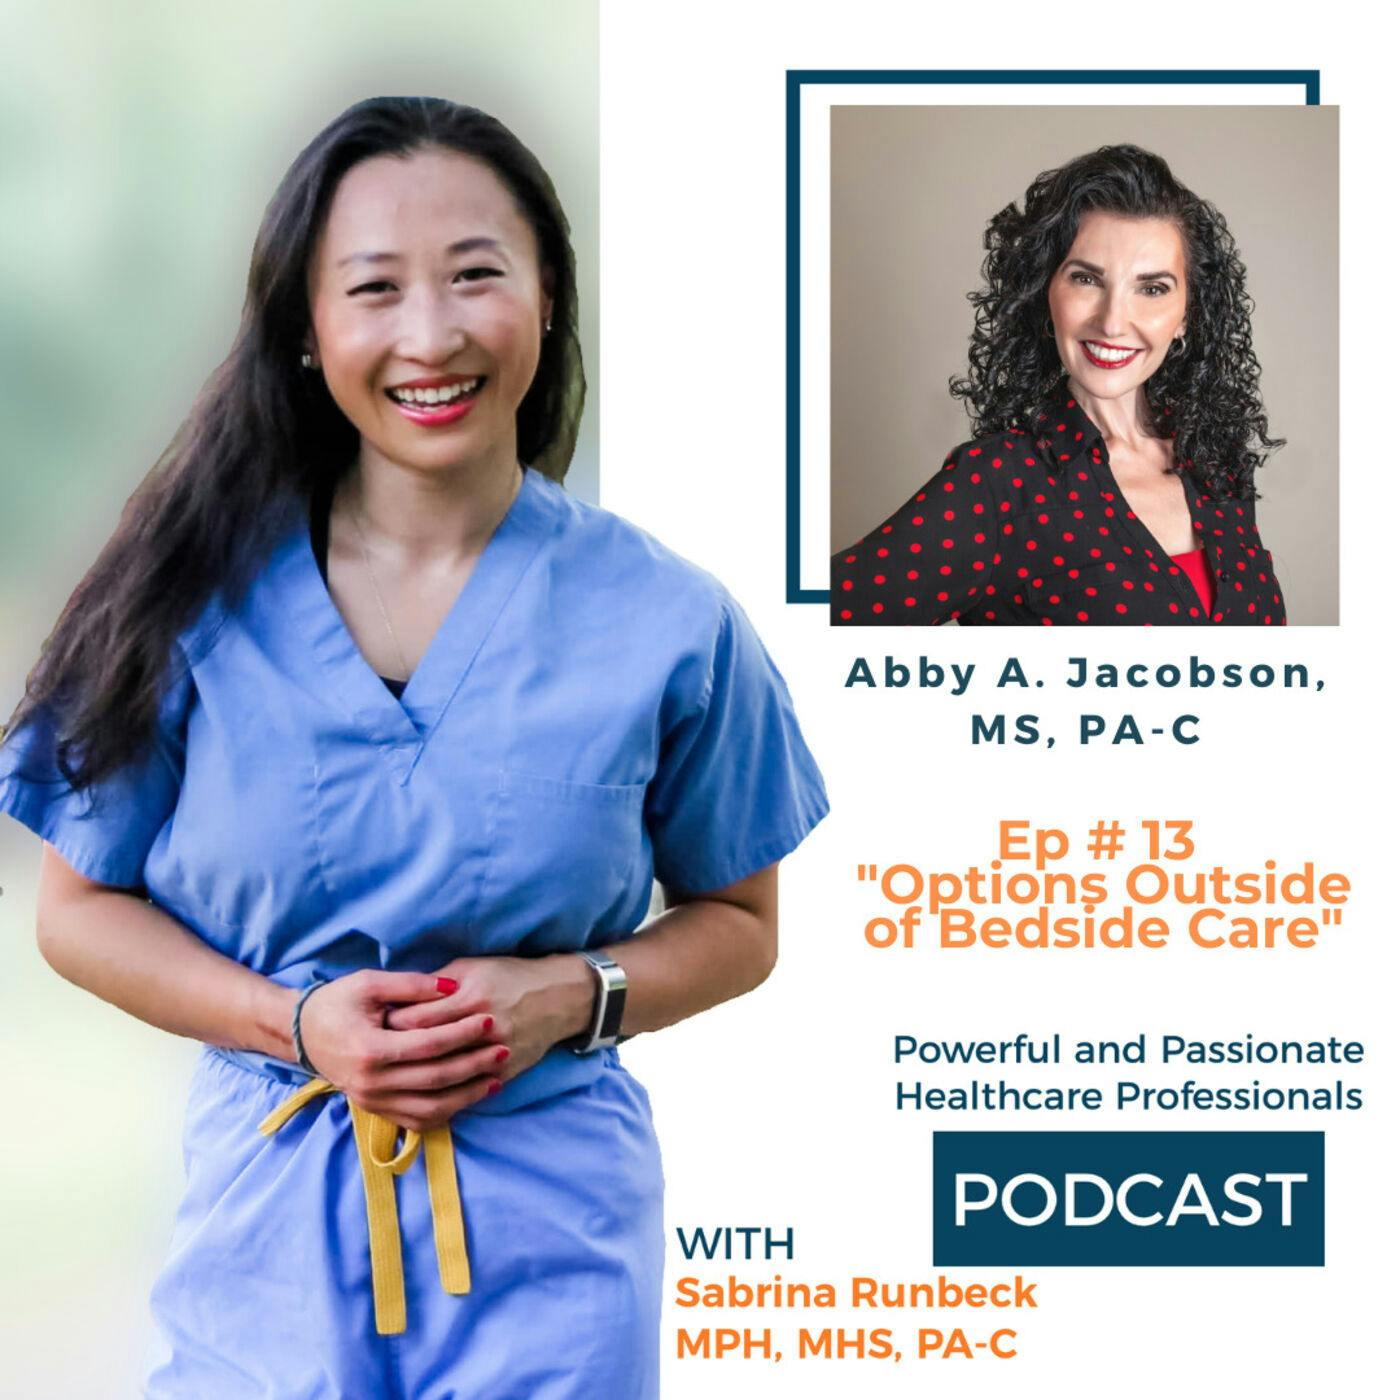 Ep 13 – Options Outside of Bedside with Abby A. Jacobson, MS, PA-C